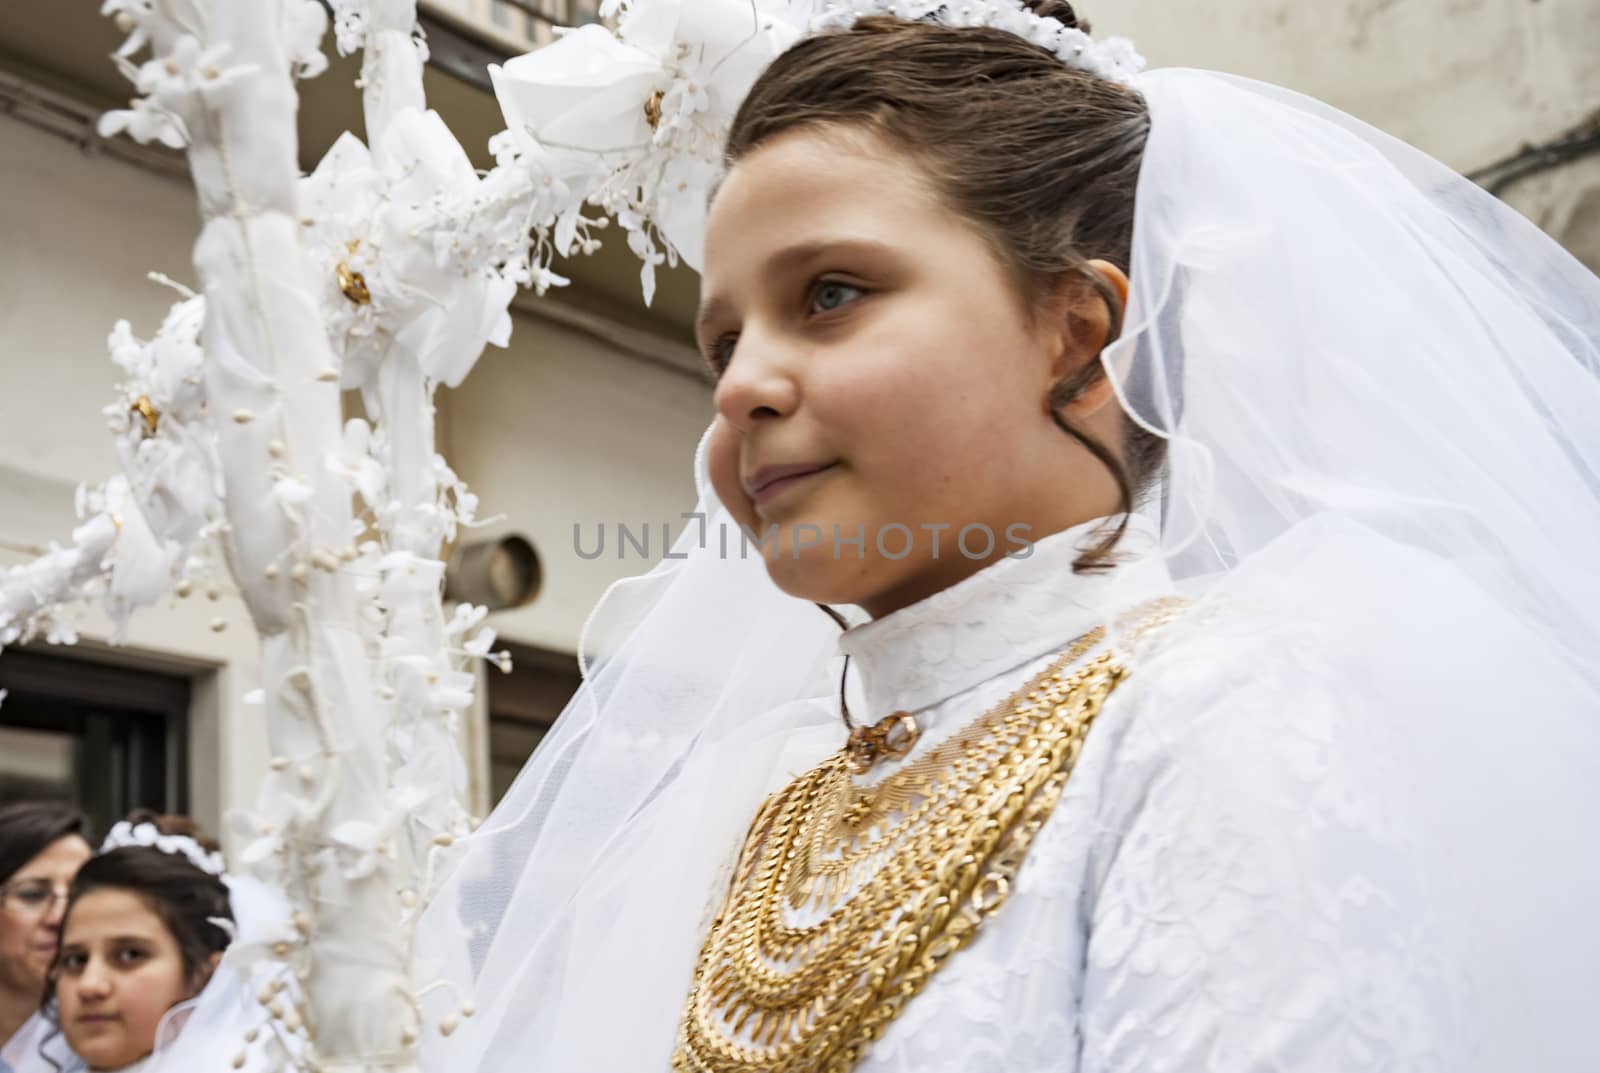 BARILE, ITALY - APRIL 18, 2014: Easter Religious Procession, the Holy Friday on April 18, 2014 in Barile, Basilicata Italy